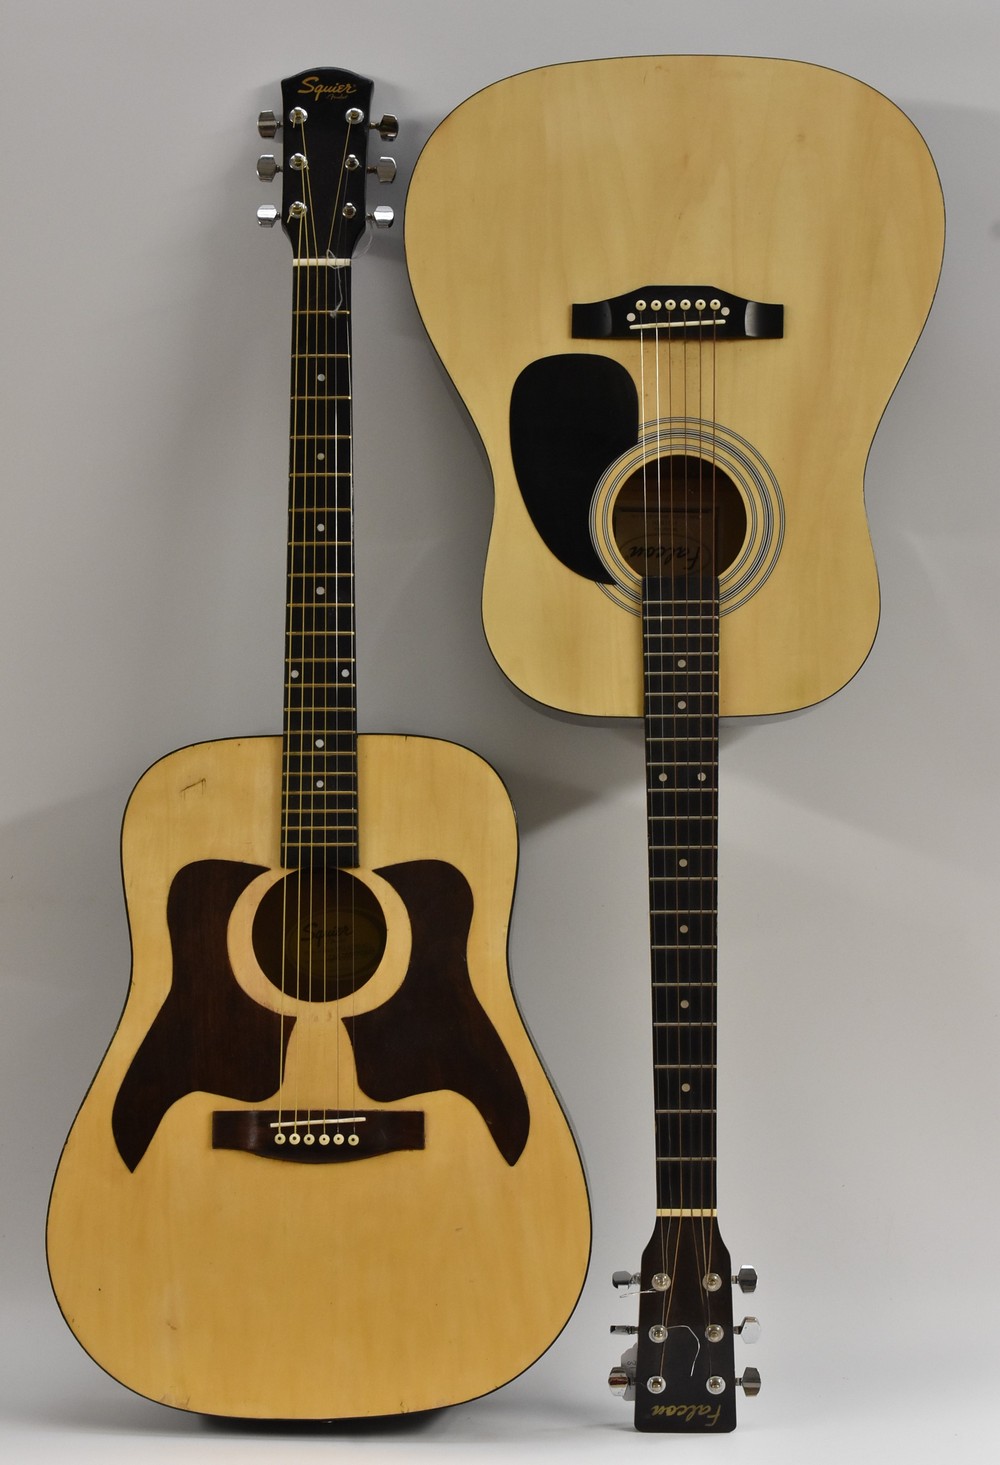 A Squier six string acoustic guitar by Fender, model no.